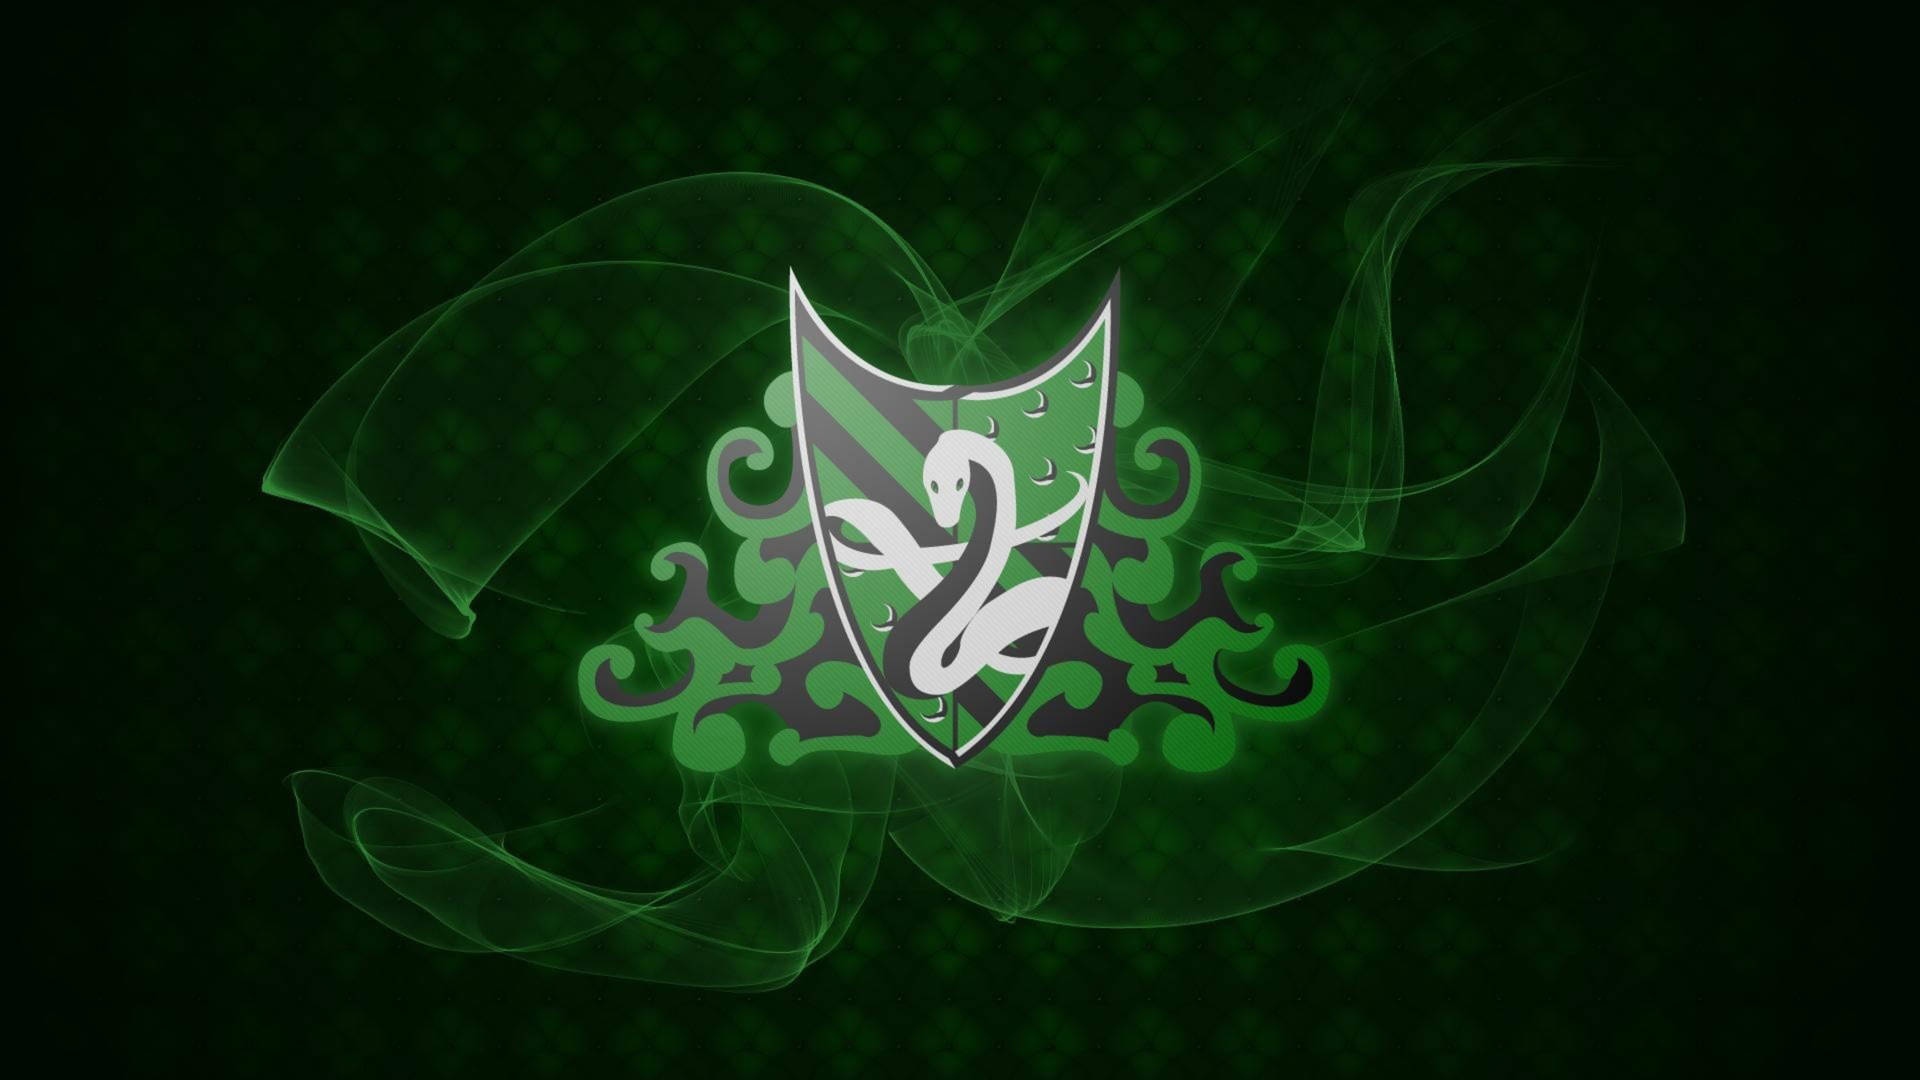 Slytherin 3840X2160 Wallpaper and Background Image